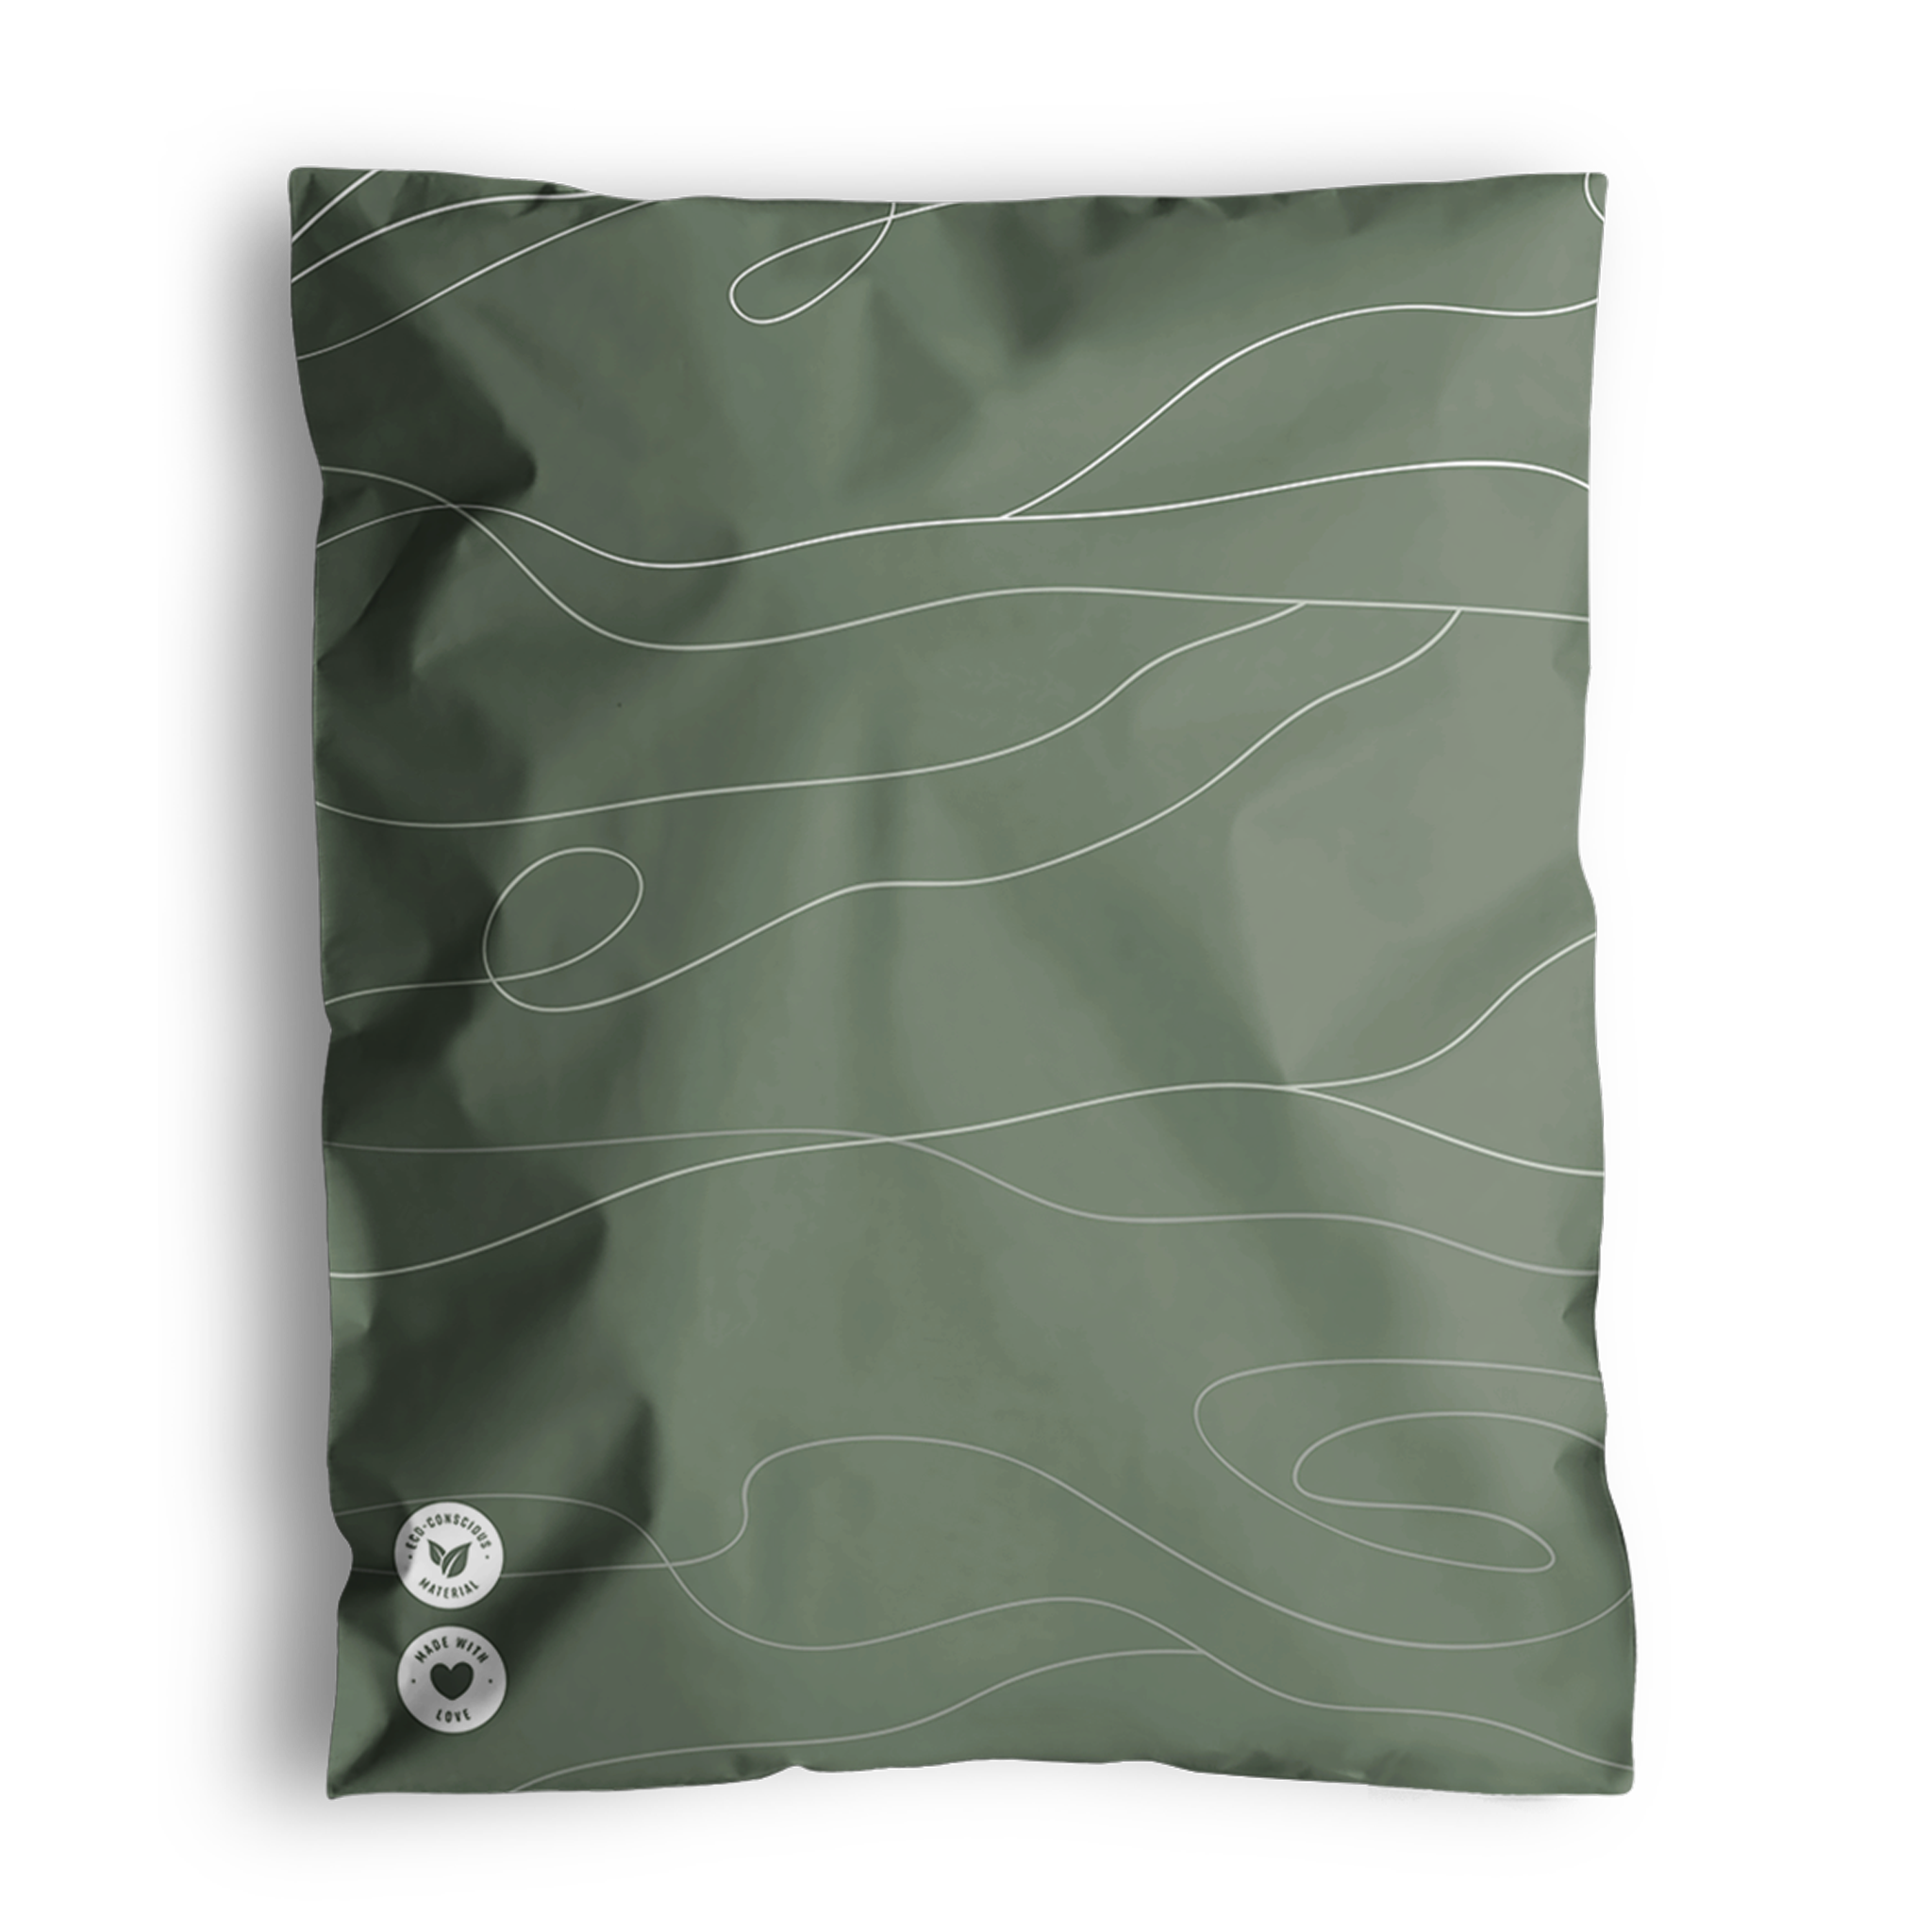 A green pillowcase with white wavy lines design. Two small round buttons with symbols are located at the bottom left corner, reminiscent of the careful detailing found in impack.co's Tidal Moss Mailers 10" x 13" used for medium-sized shipments.